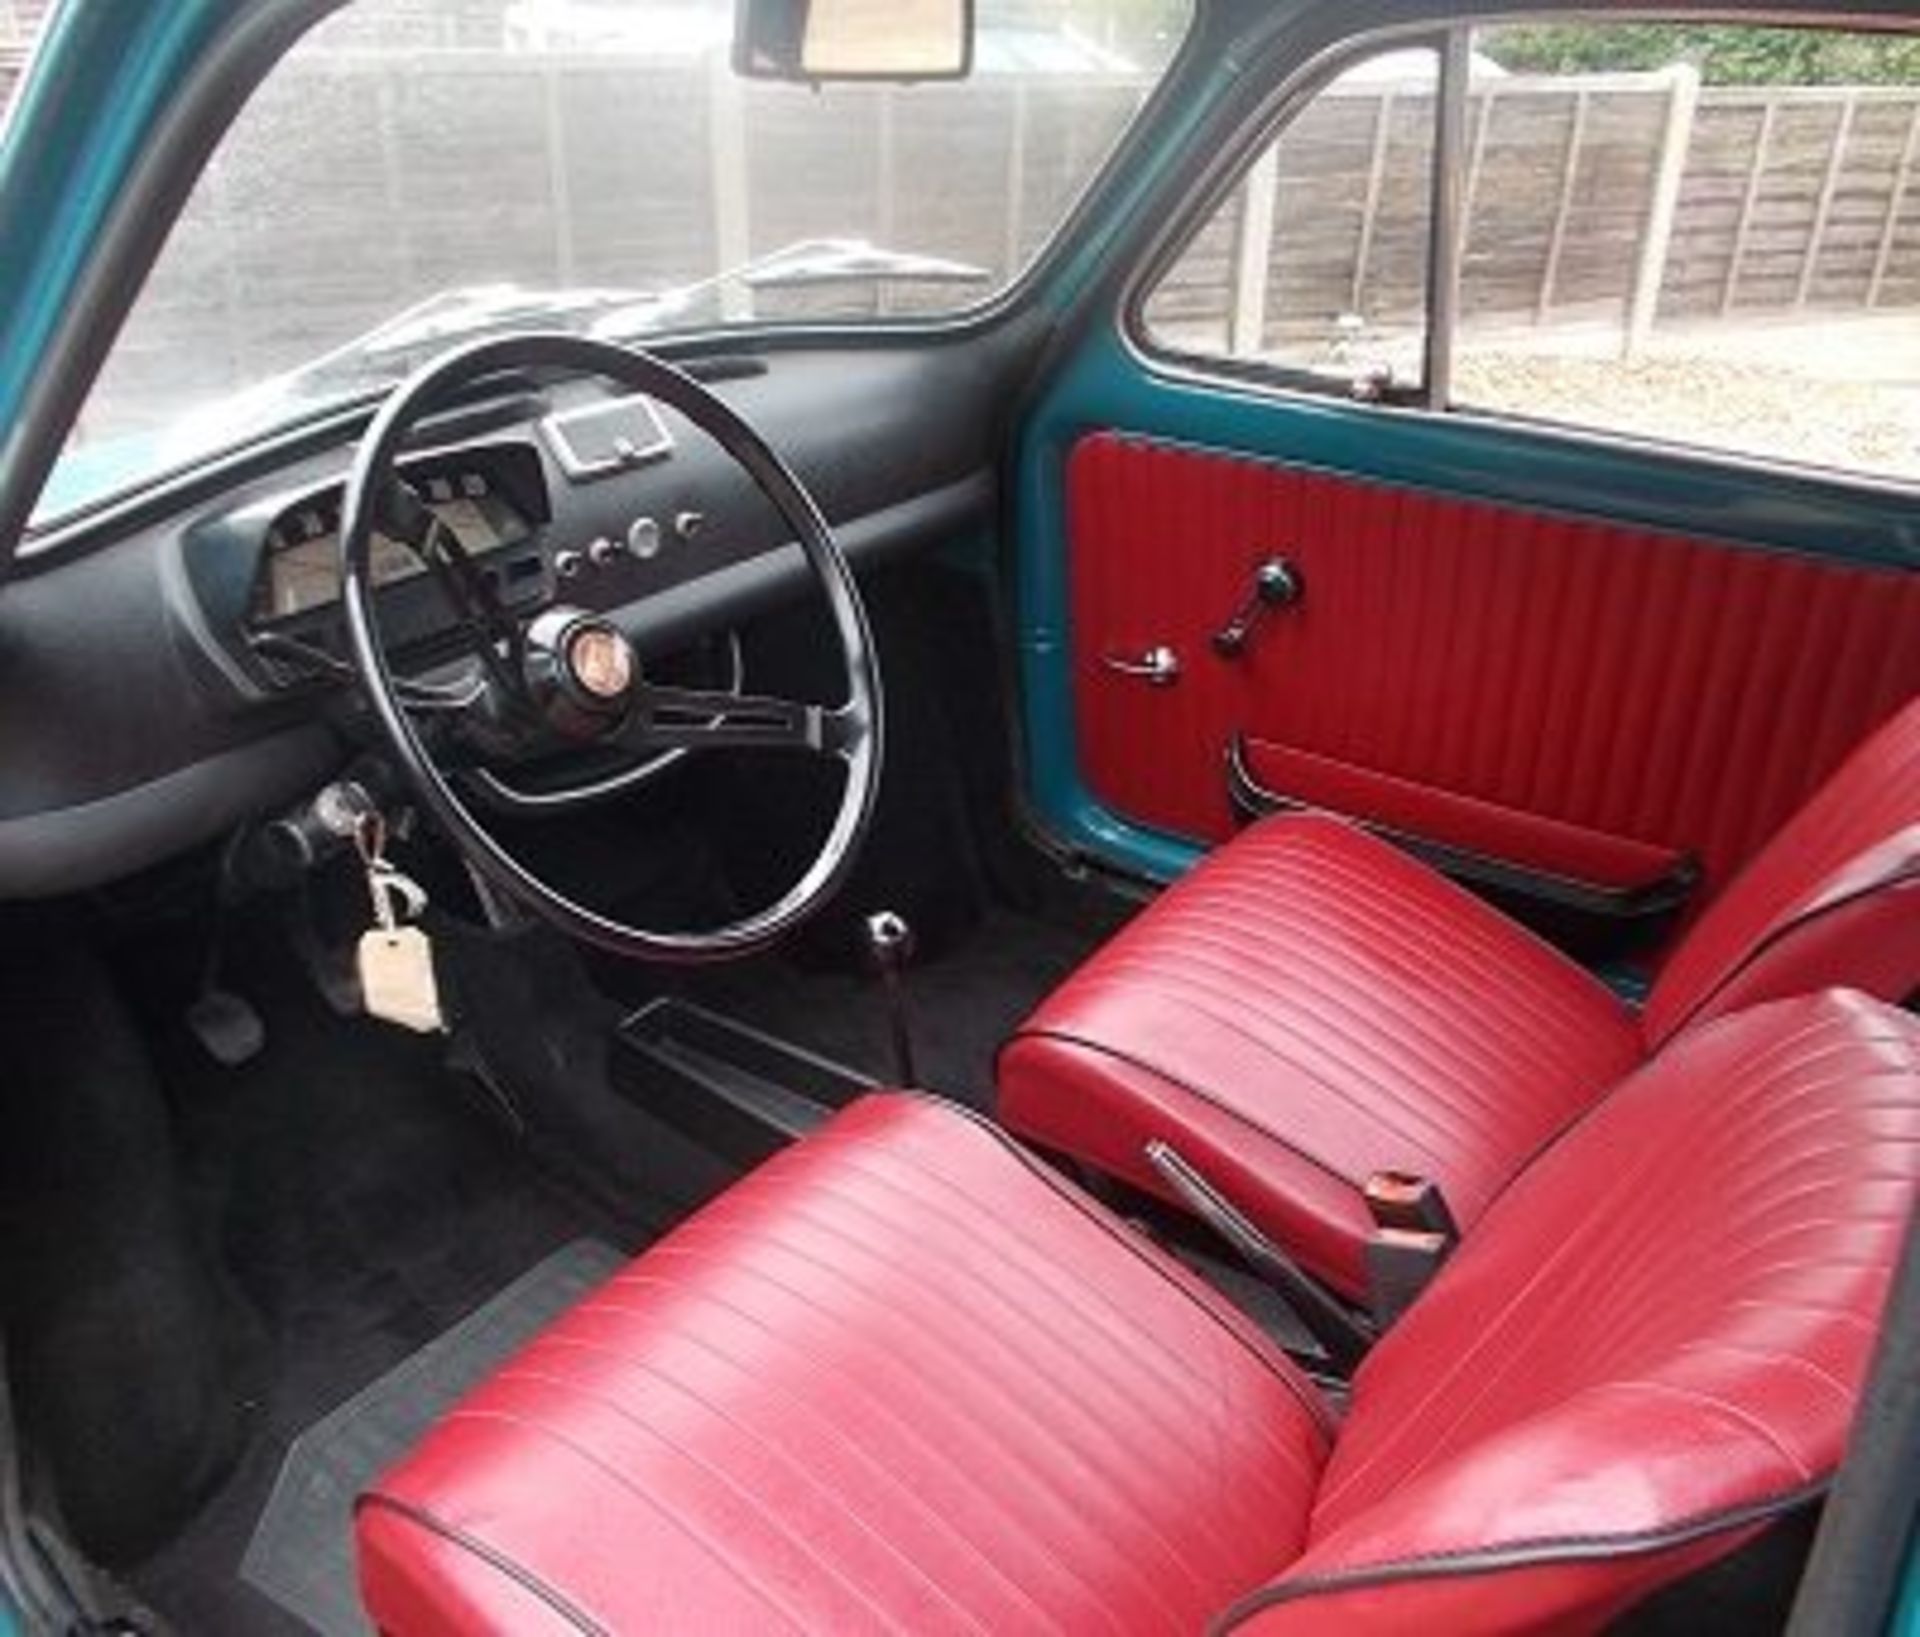 Fiat 500L 1970 “Fully Restored” - The first of our beautiful Fiat 500’s being offered is this 1970 - Image 5 of 7